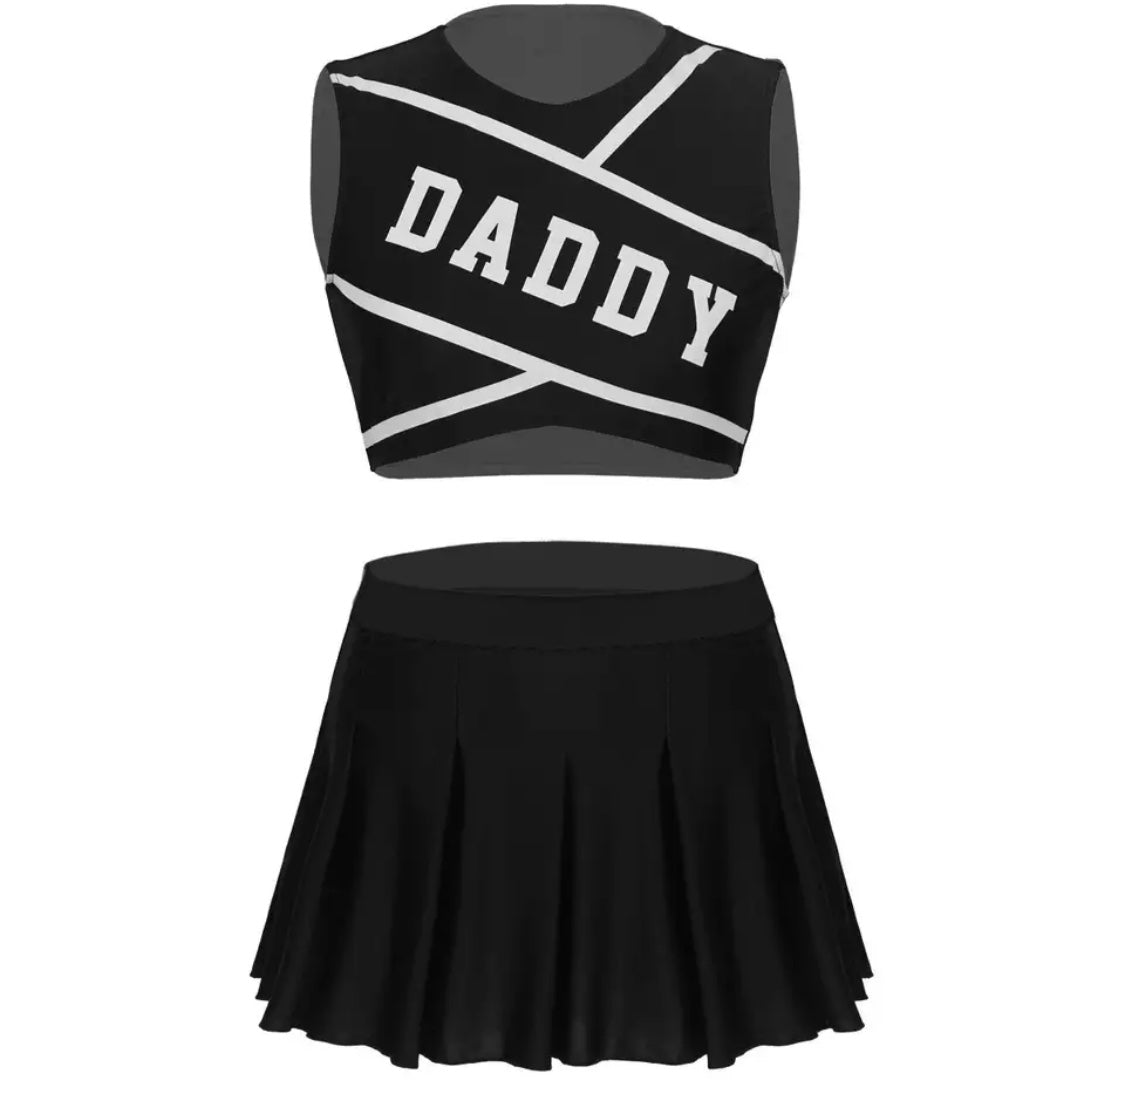 Daddy Cheerleading Outfit